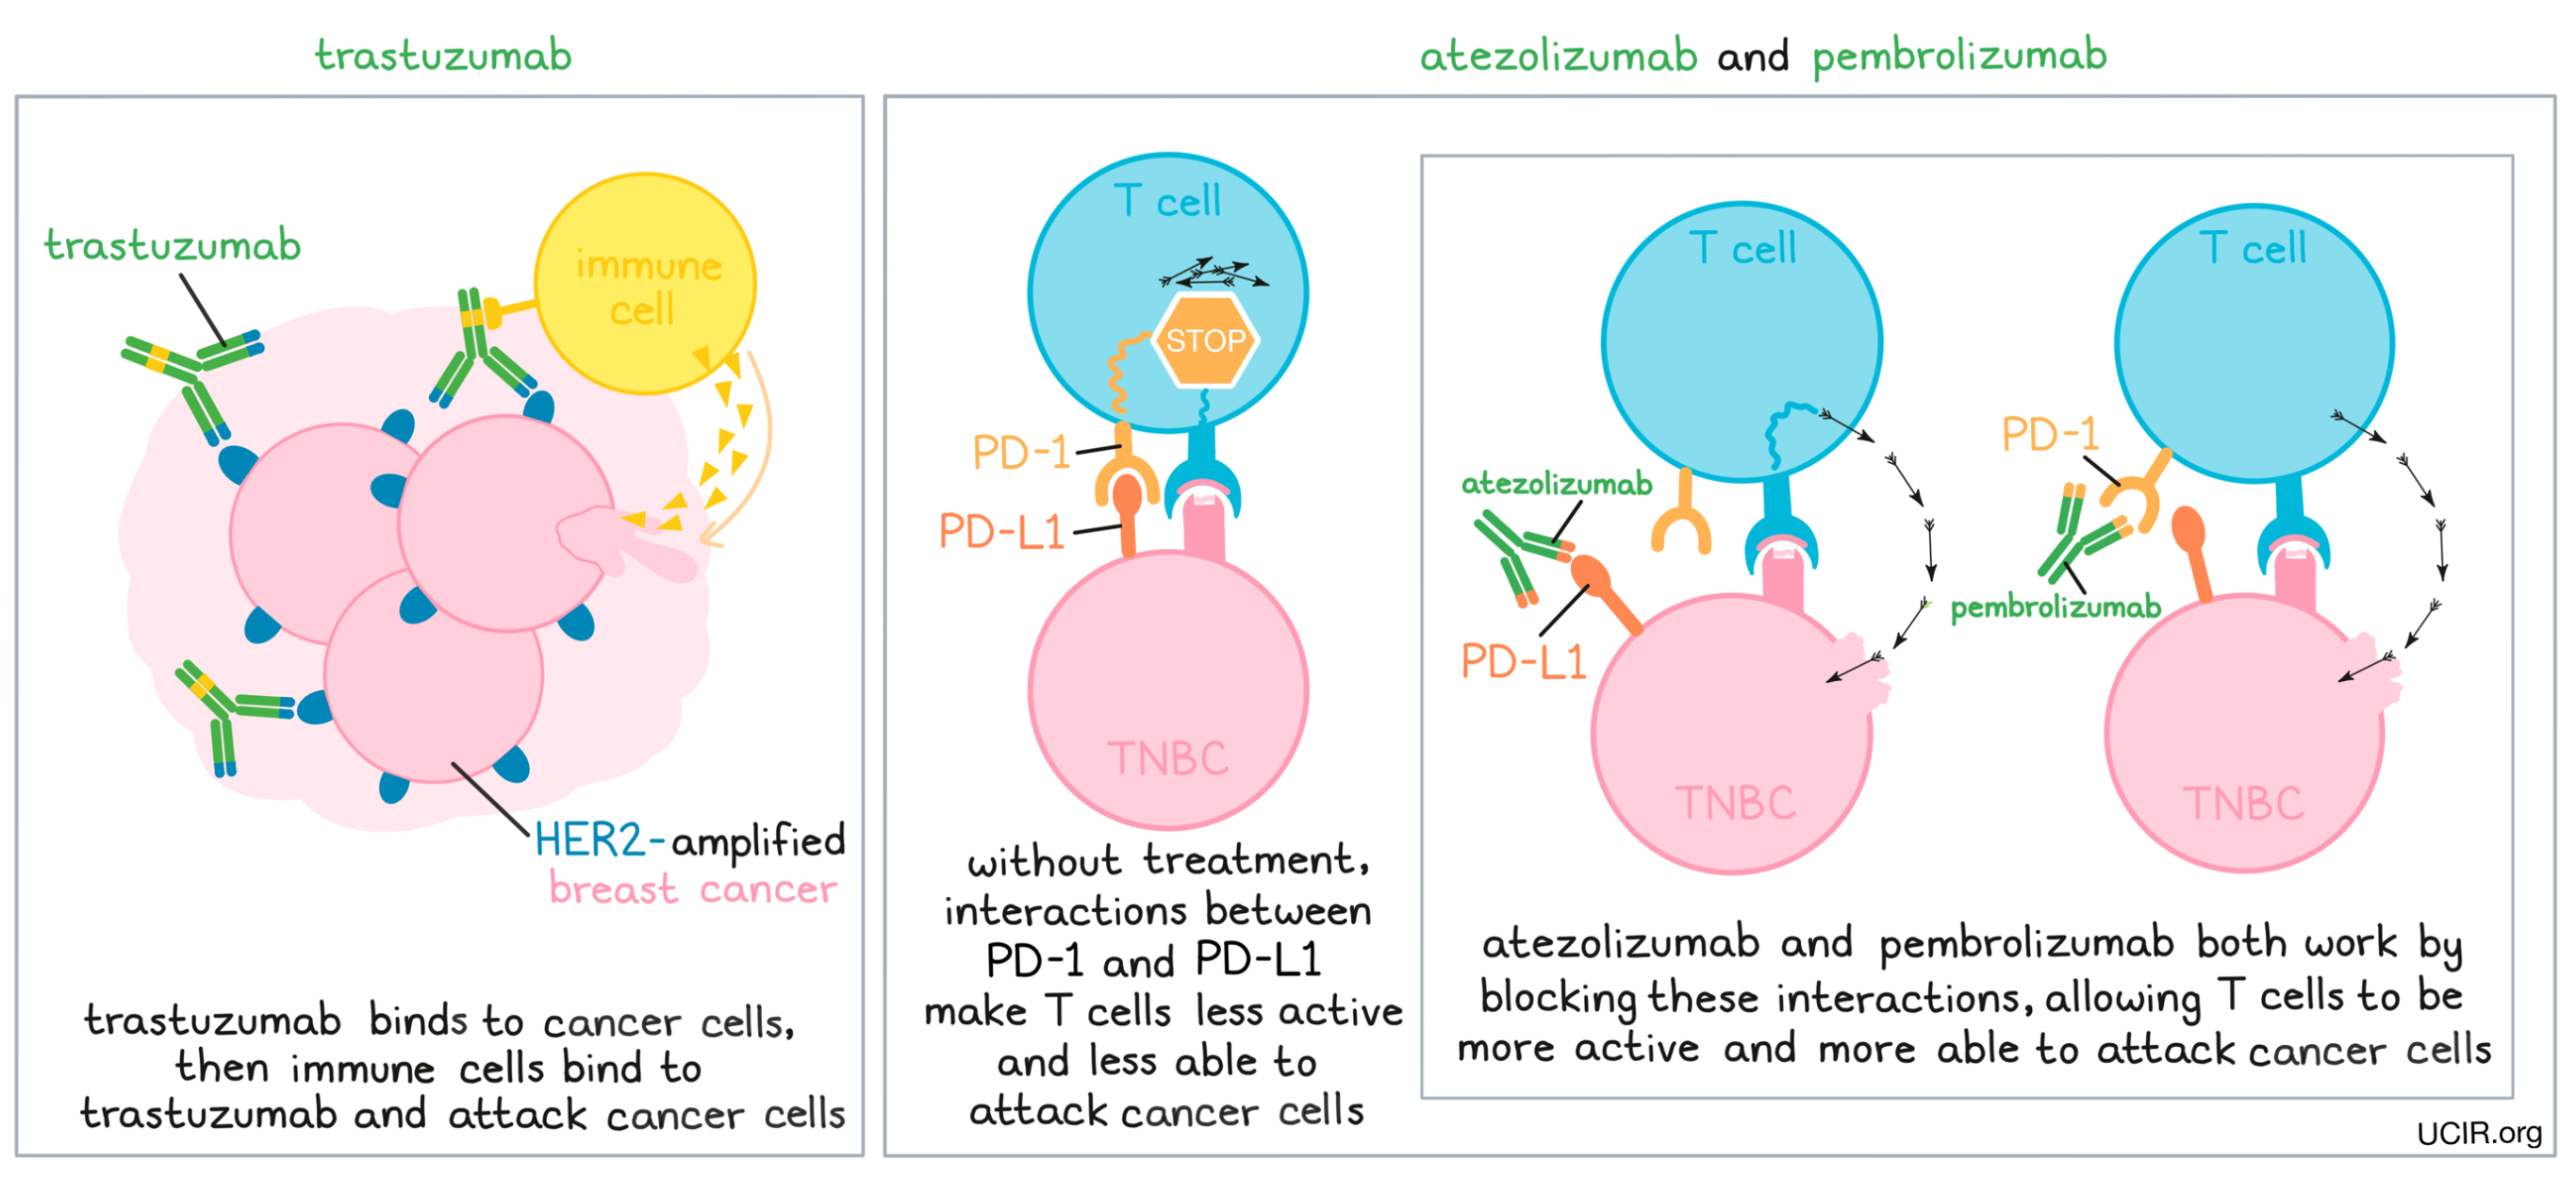 Illustration showing how different immunotherapies work